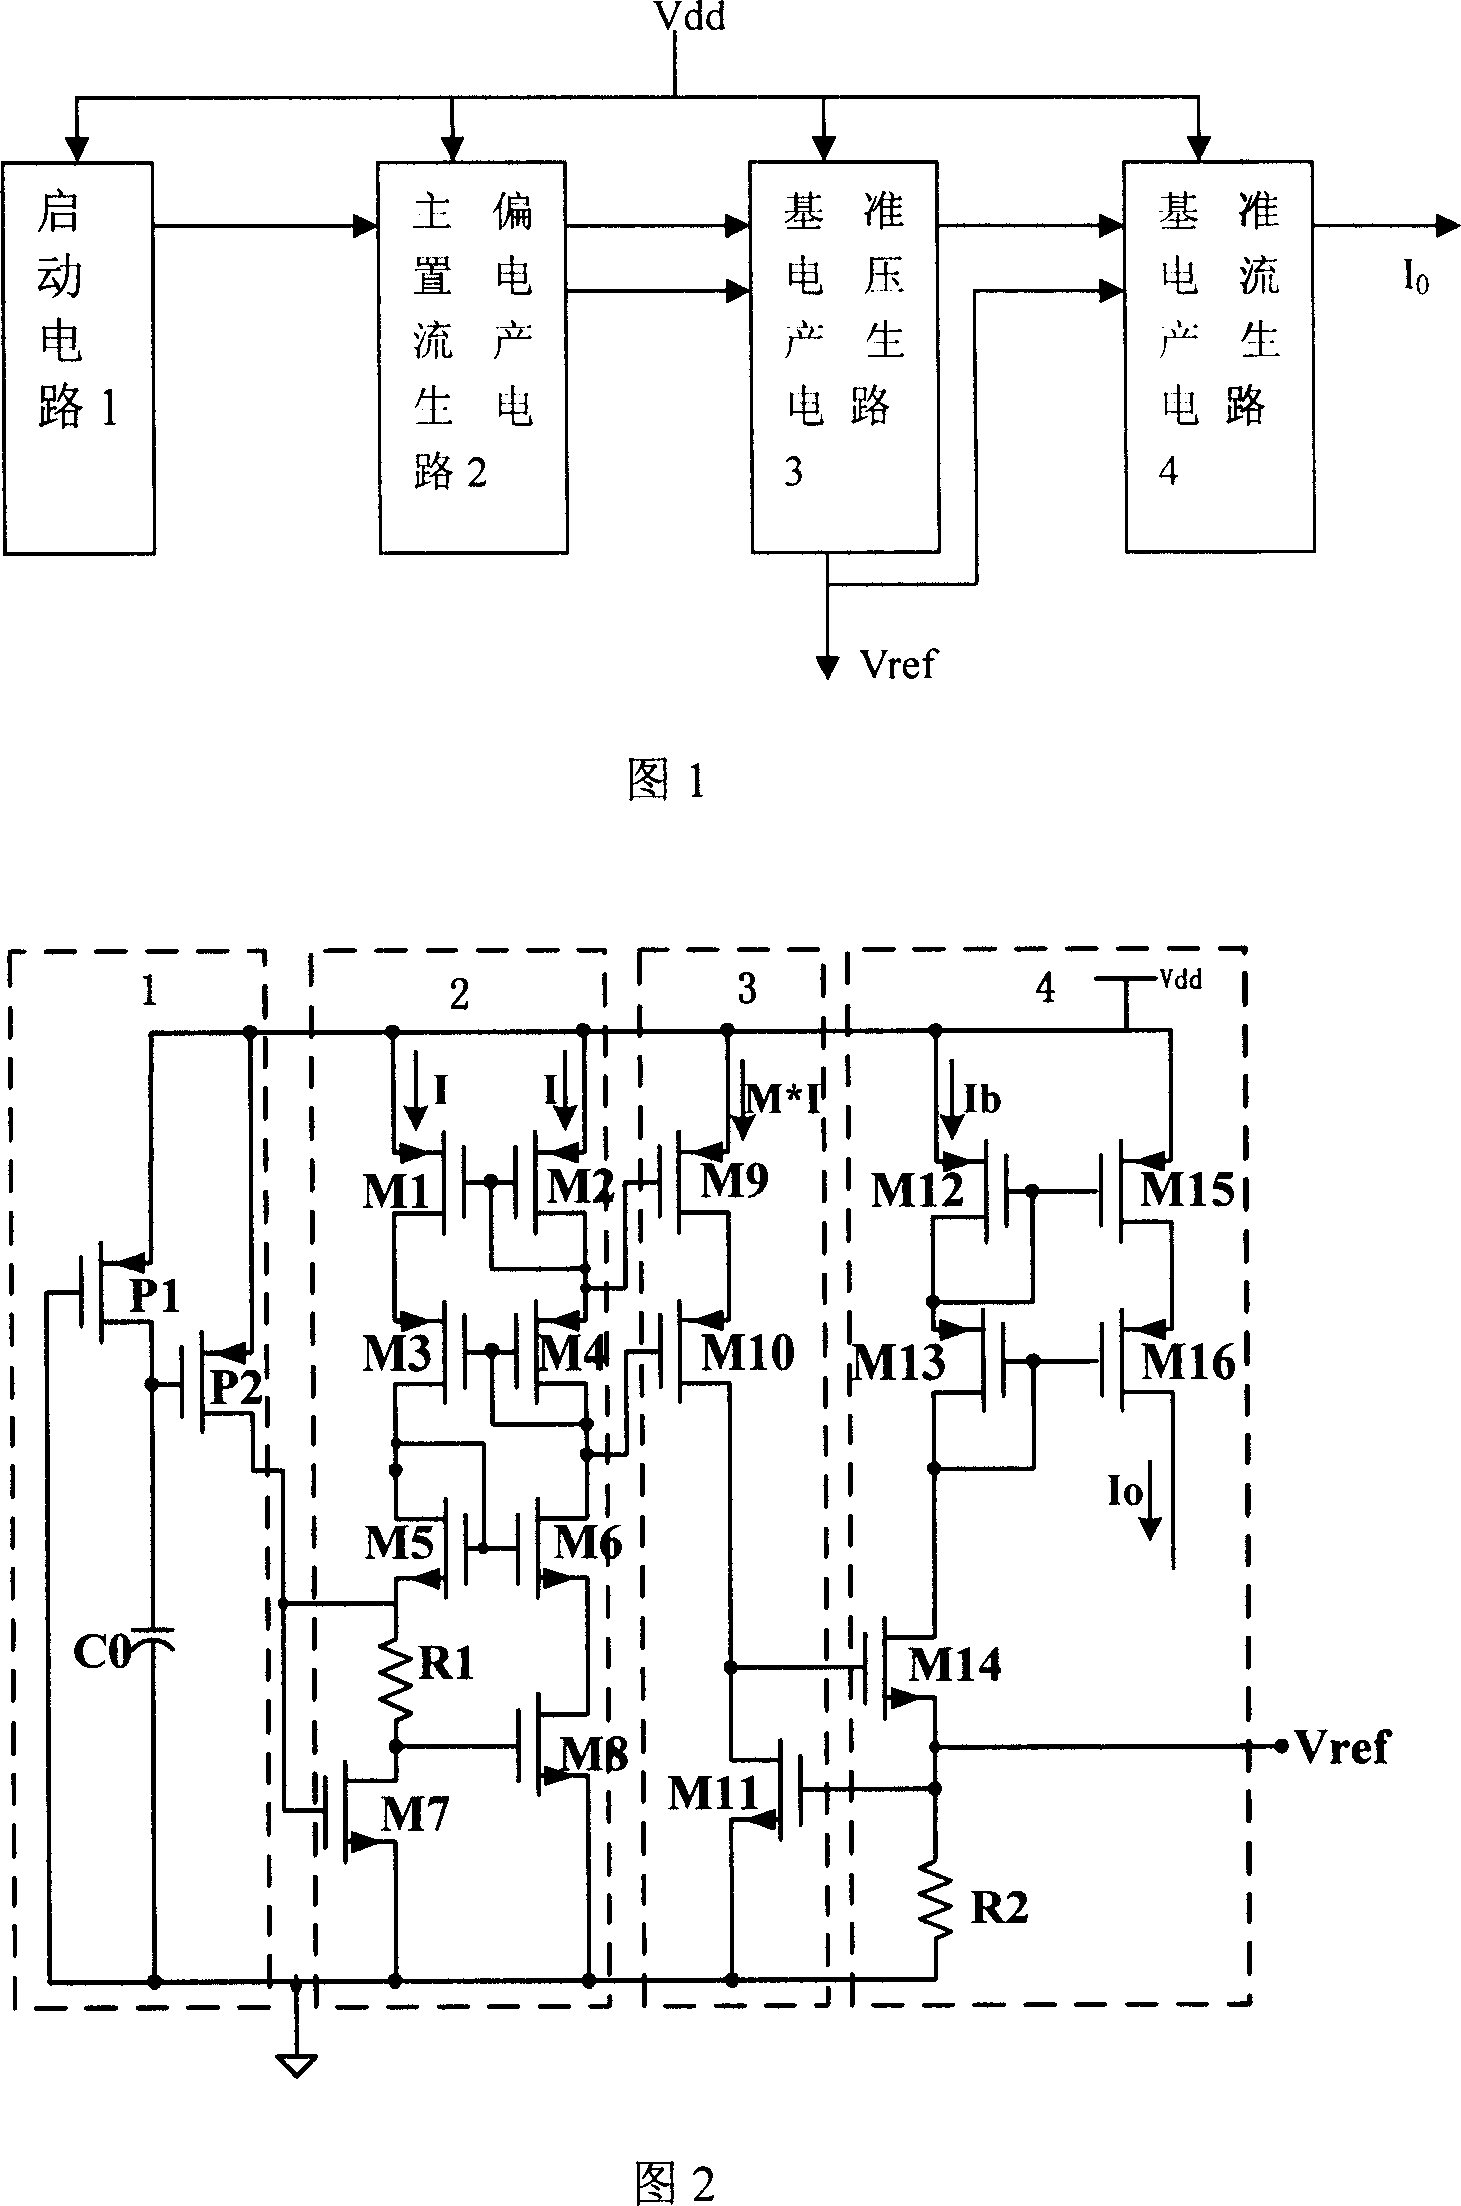 CMOS reference source circuit